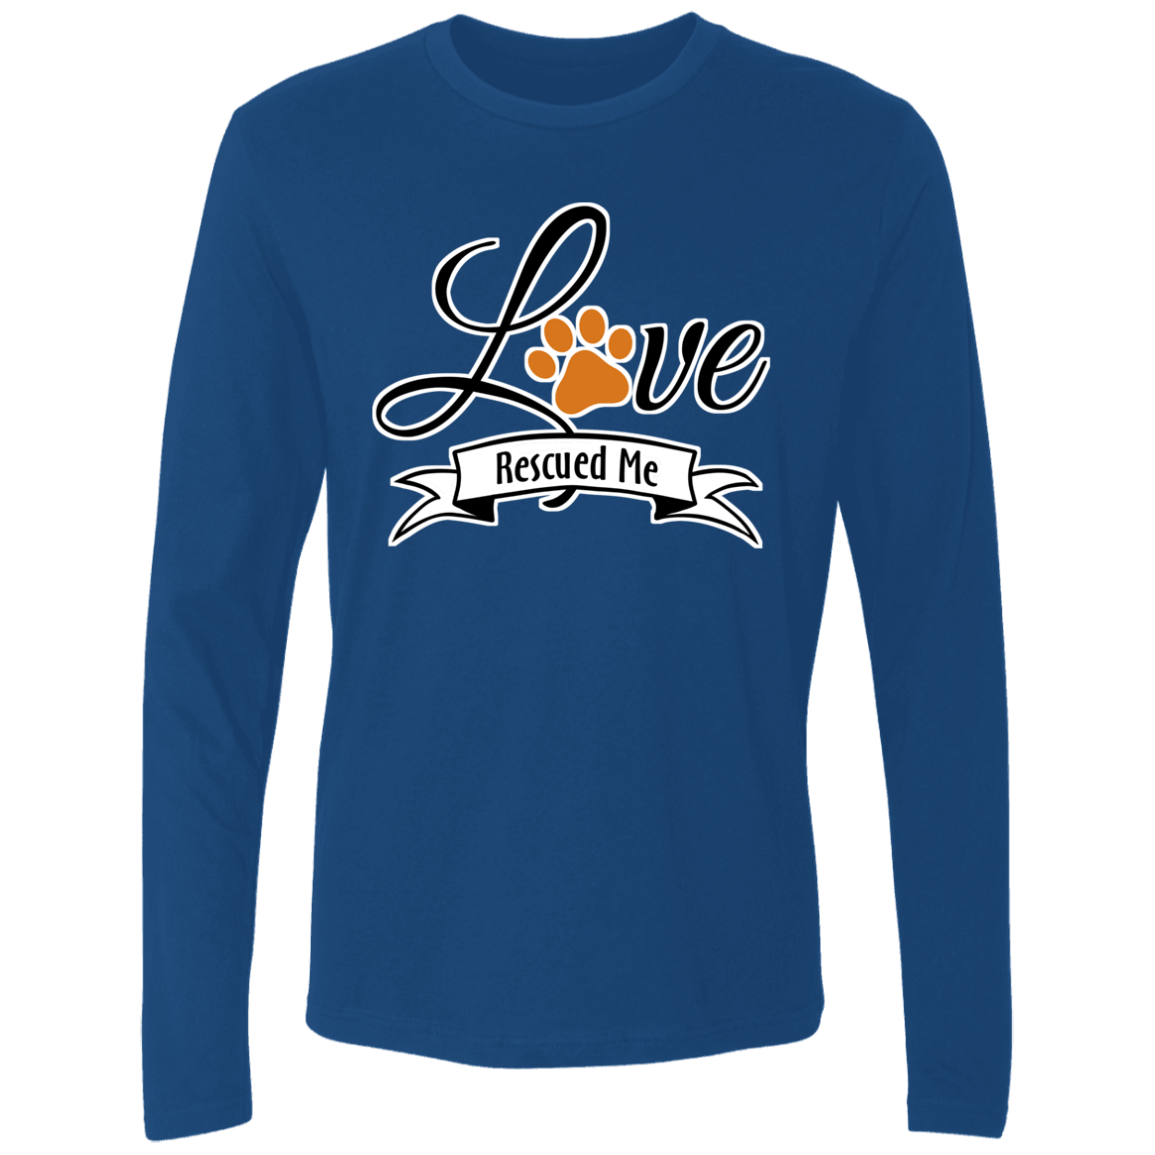 Love Rescued Me - Long Sleeve T-shirt.